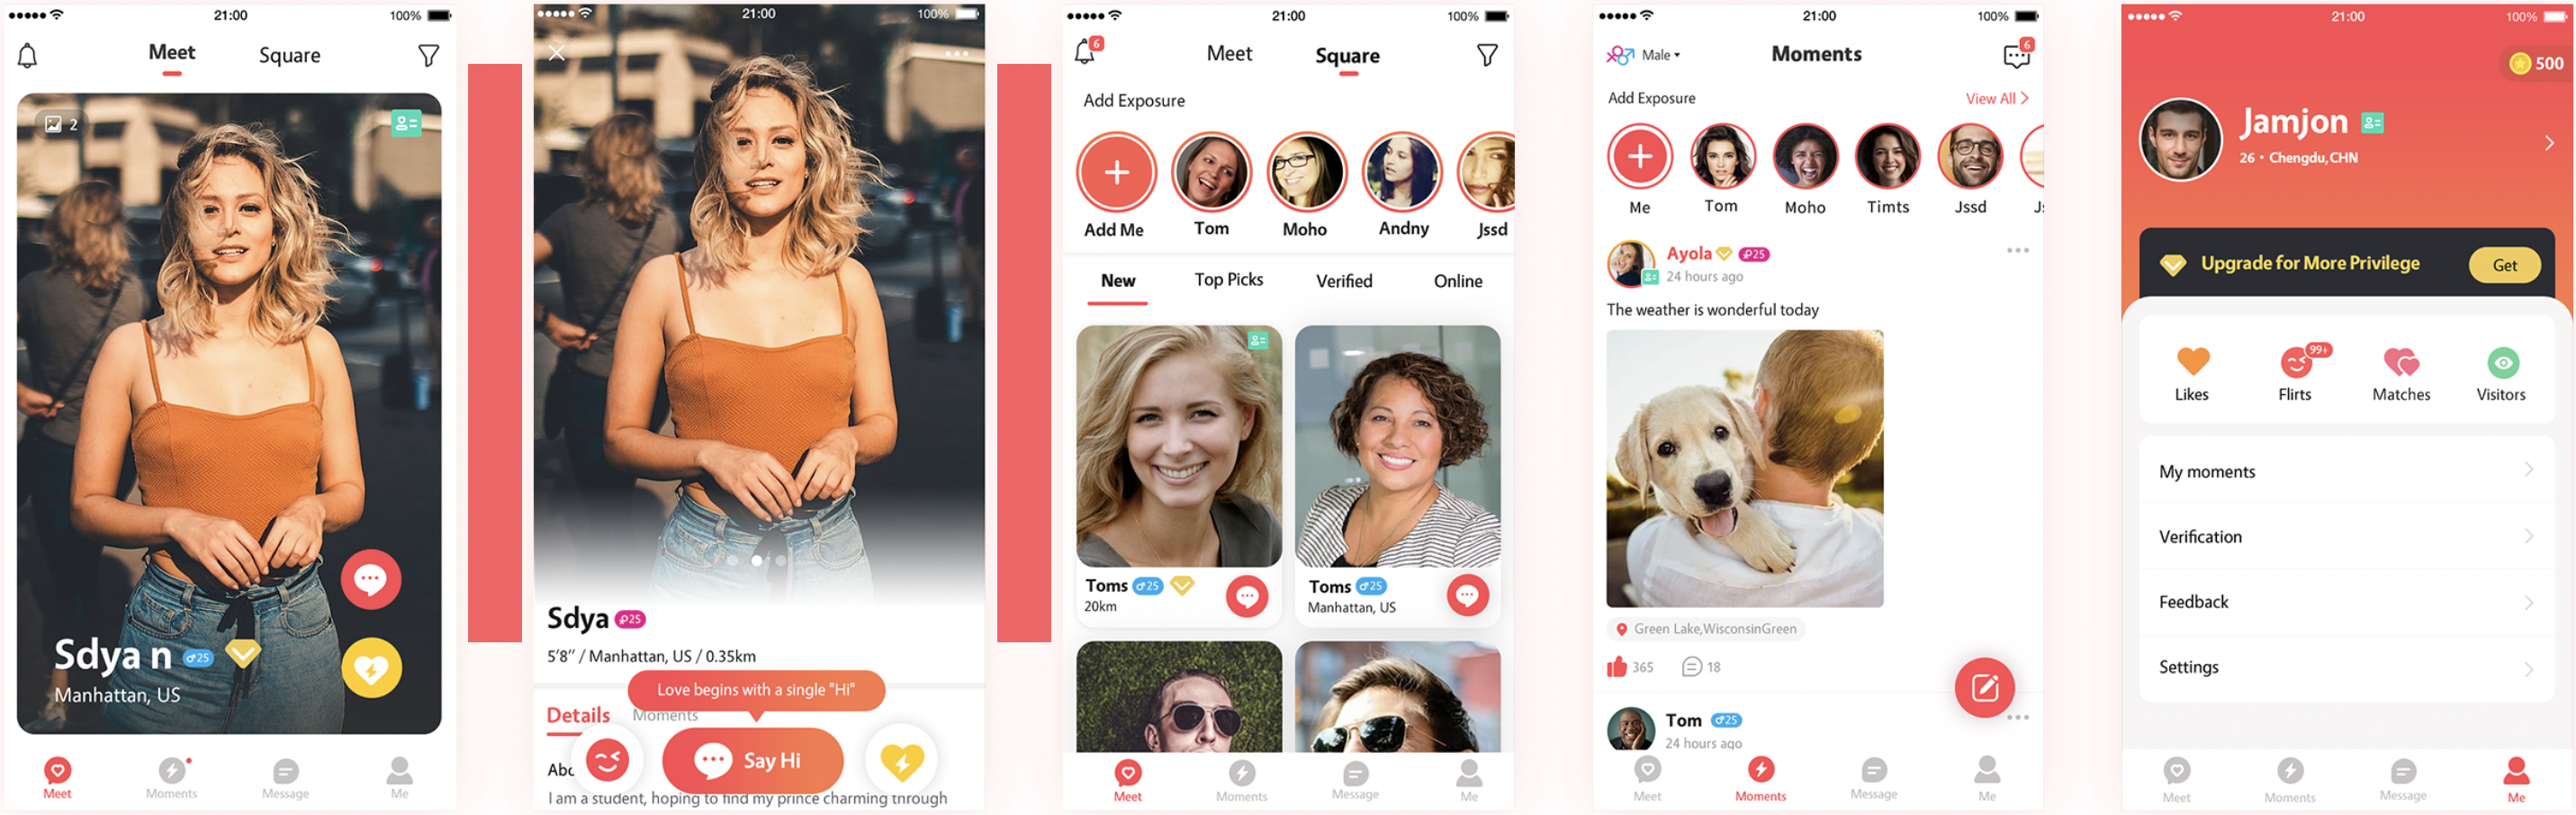 Here Are 10 Tinder Competitors You’ve Probably Never Heard Of